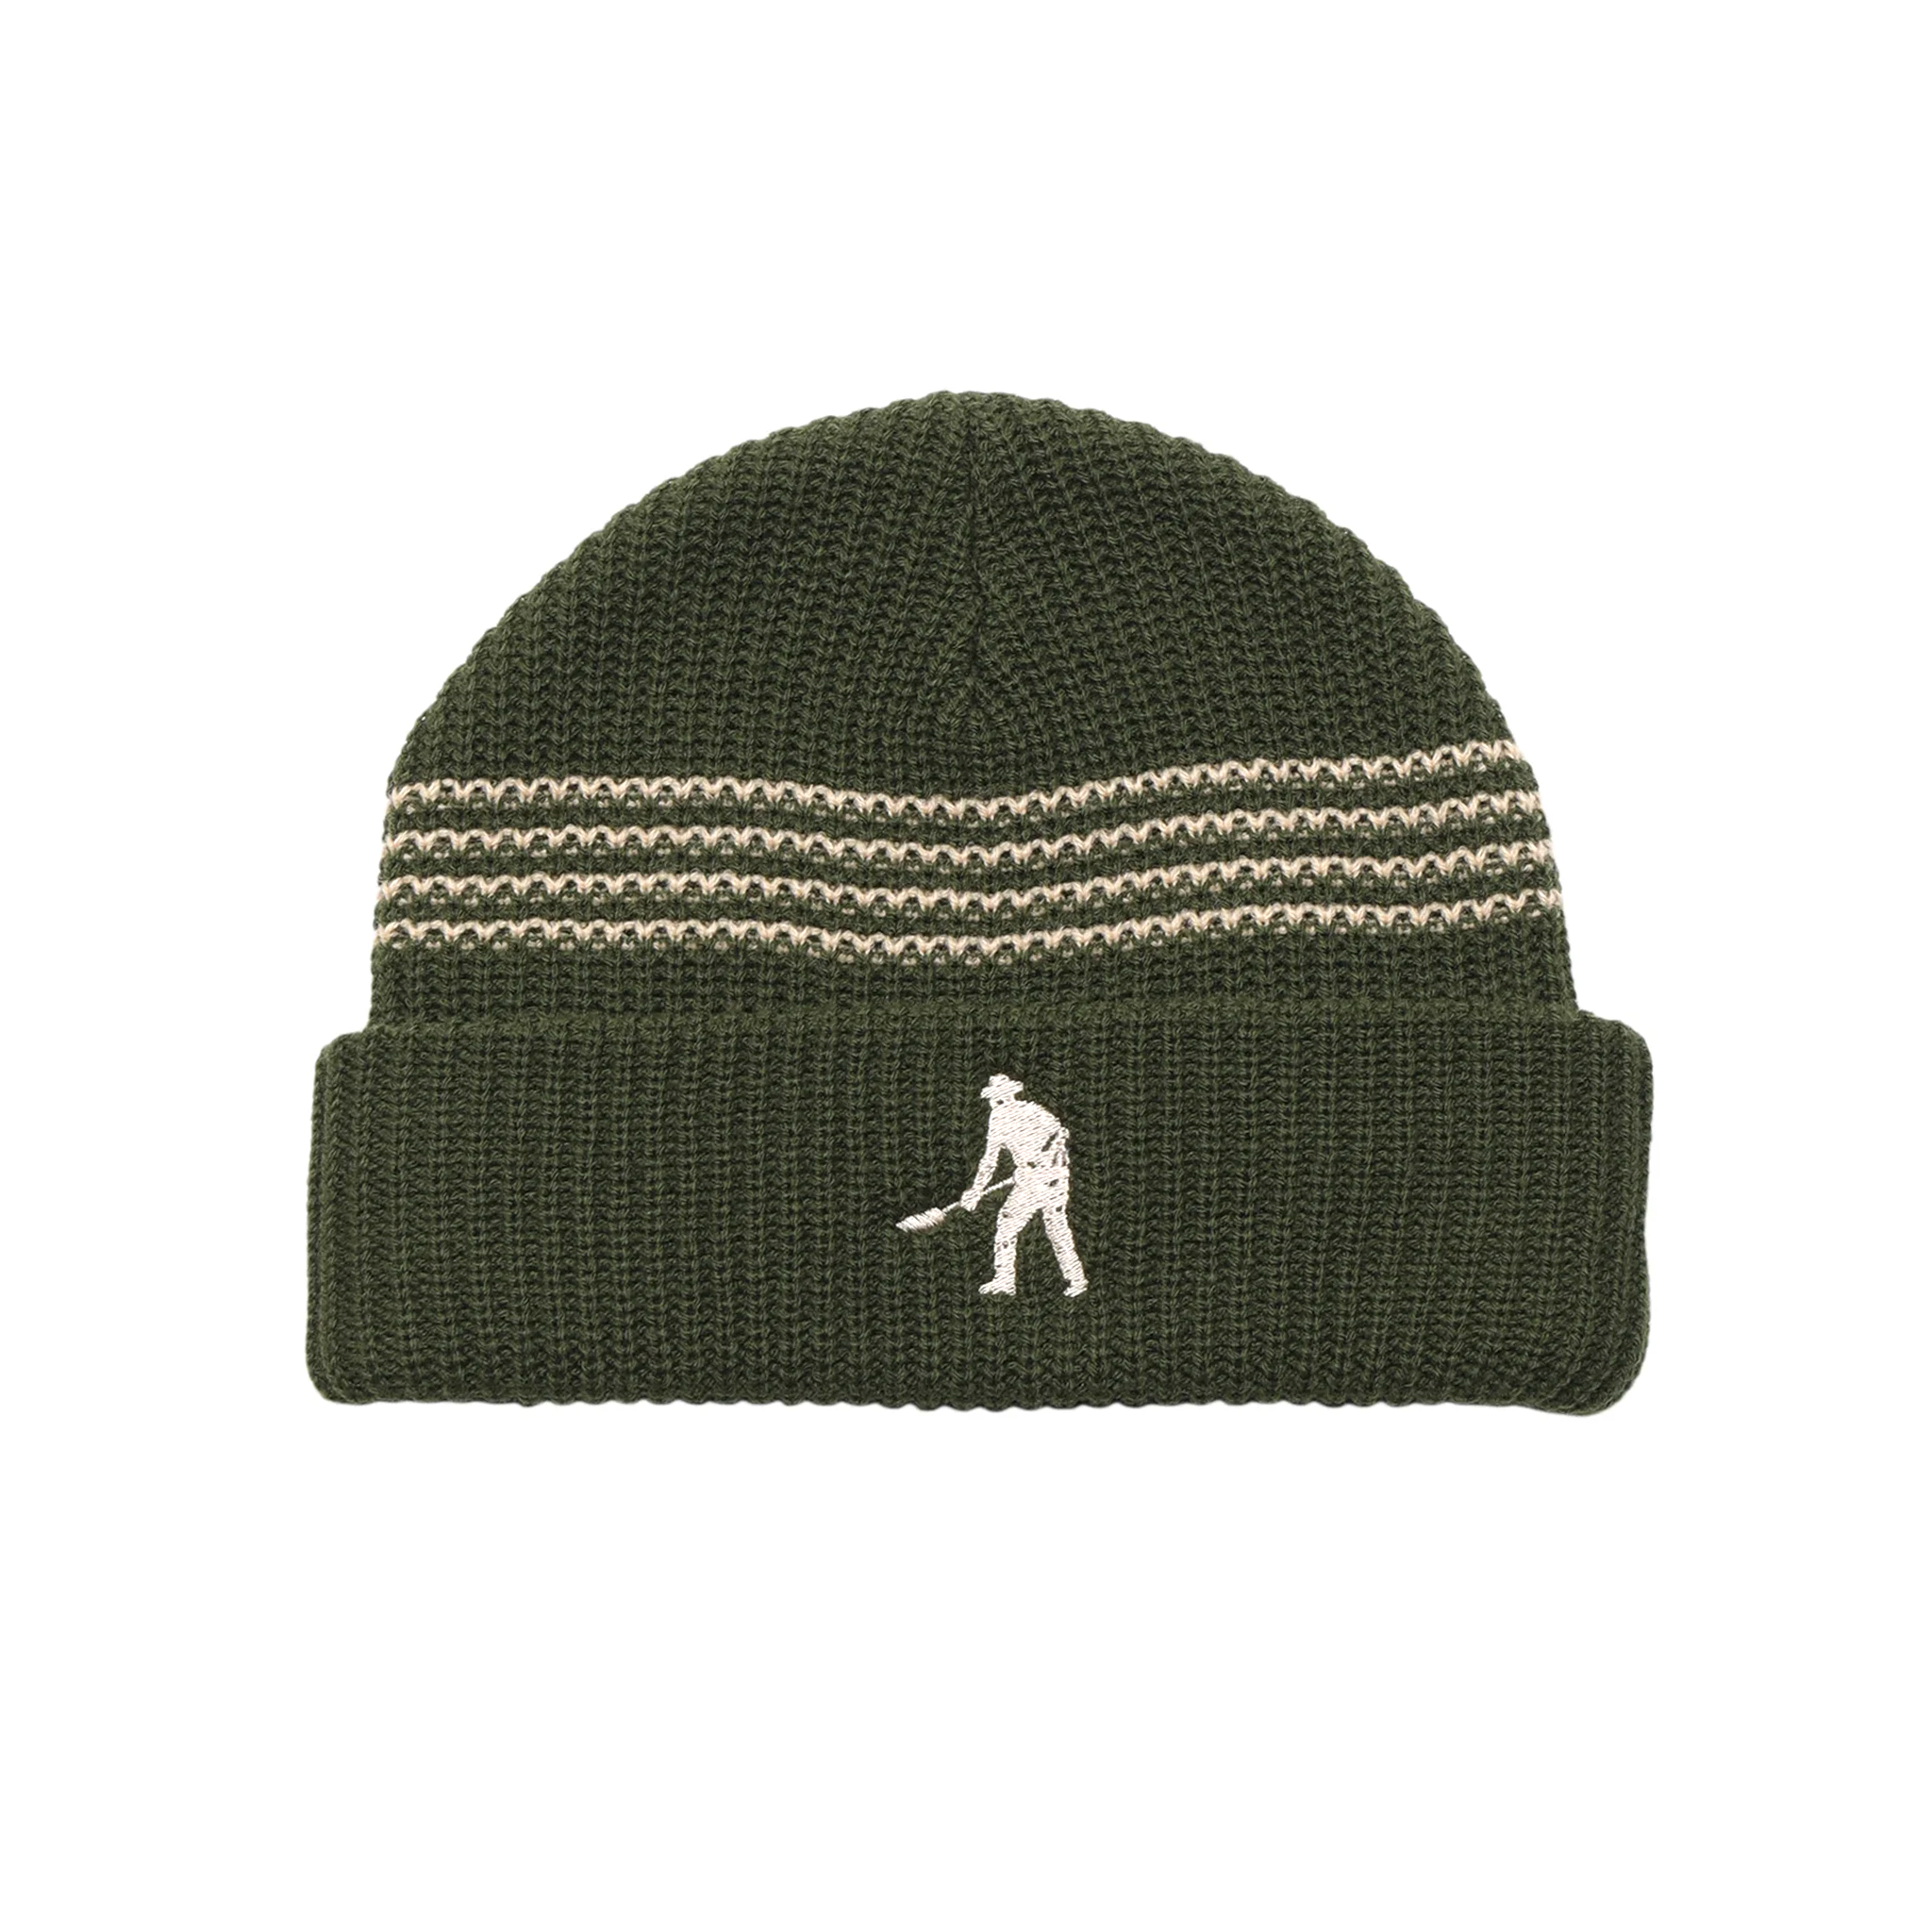 PASS~PORT - "DIGGER" STRIPED KNITED BEANIE OLIVE/CREAM